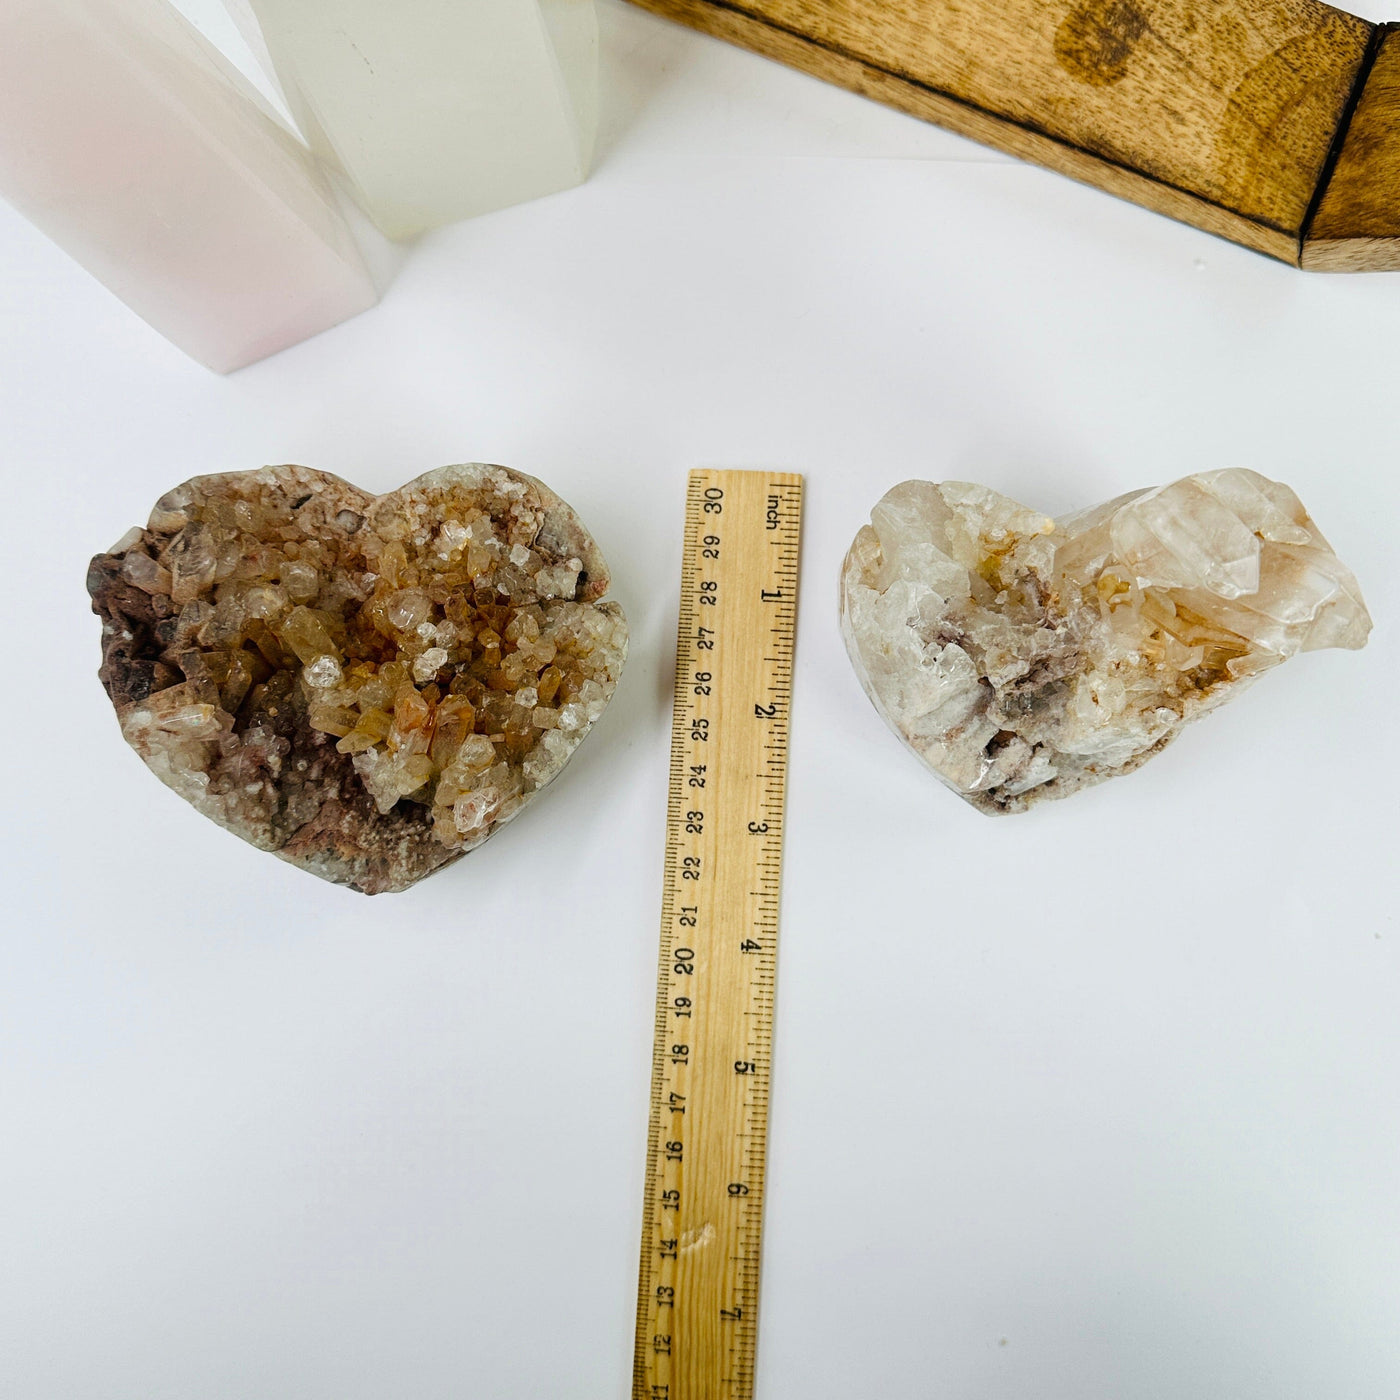 tangerine quartz hearts next to a ruler for size refernce